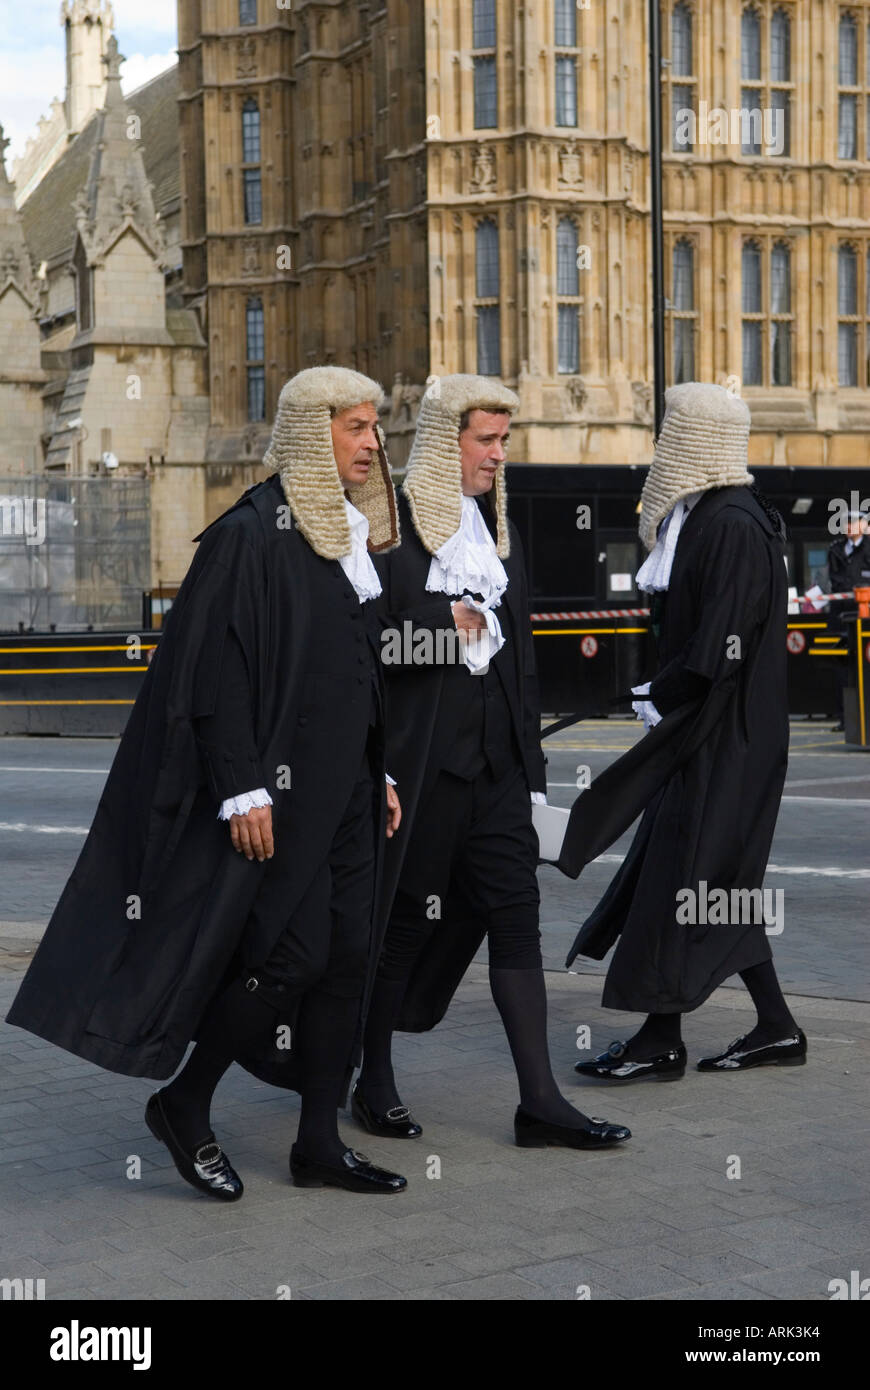 Lawyers Barristers Judges in wigs and gowns London, Lord Chancellors Breakfast. Westminster Uk England 2000s About turn, indecision a change of mind. Stock Photo